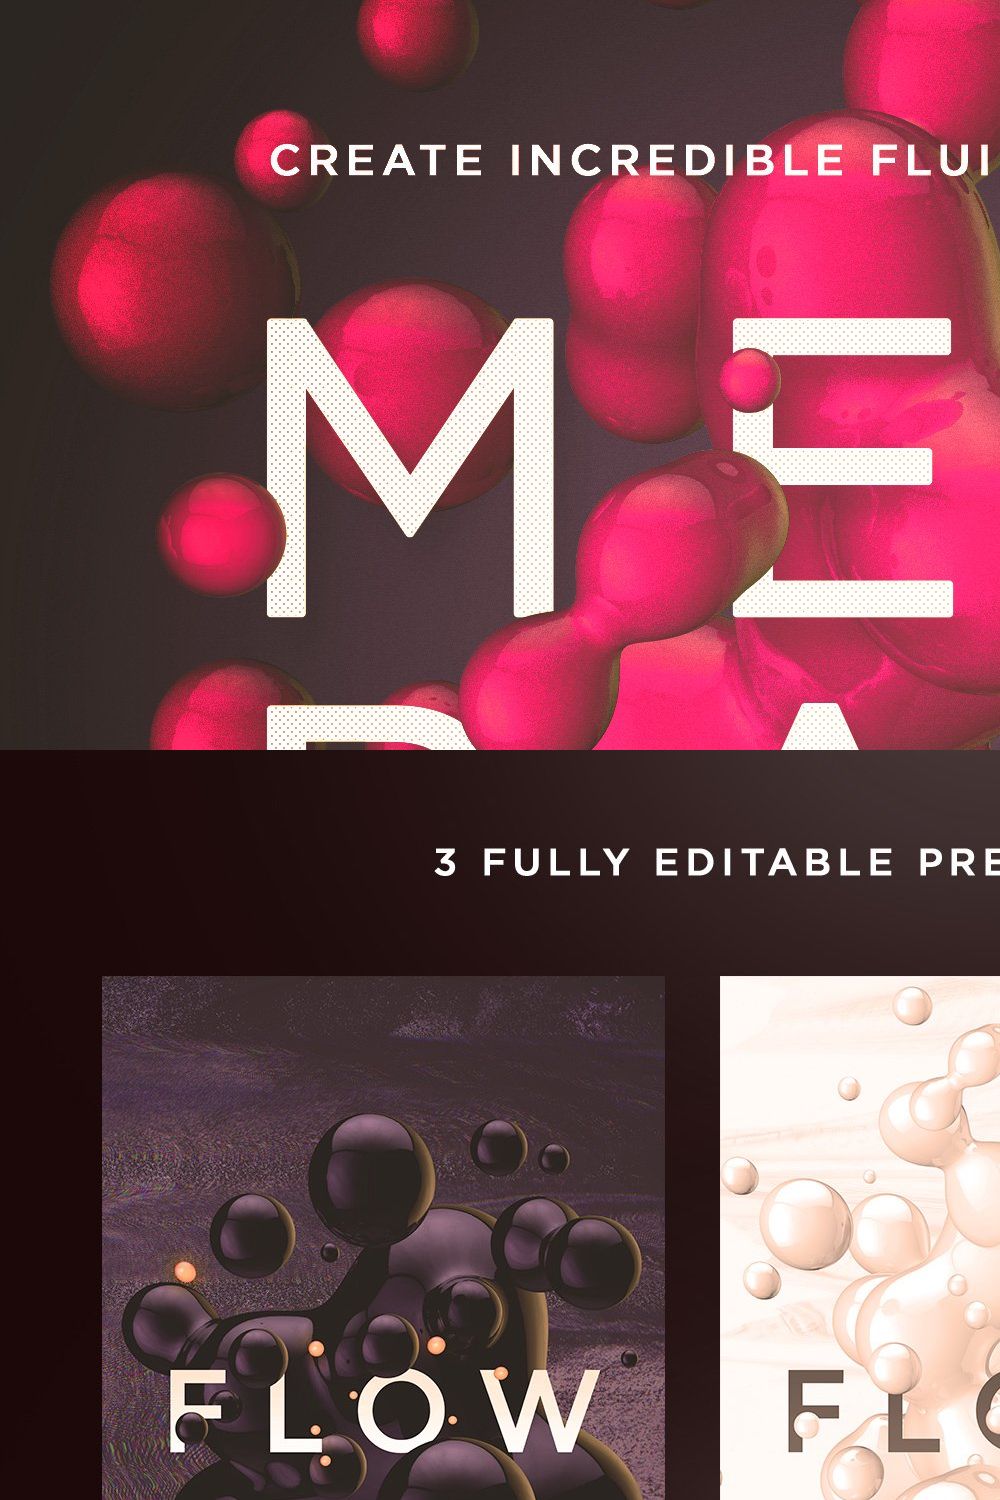 Metaball pinterest preview image.